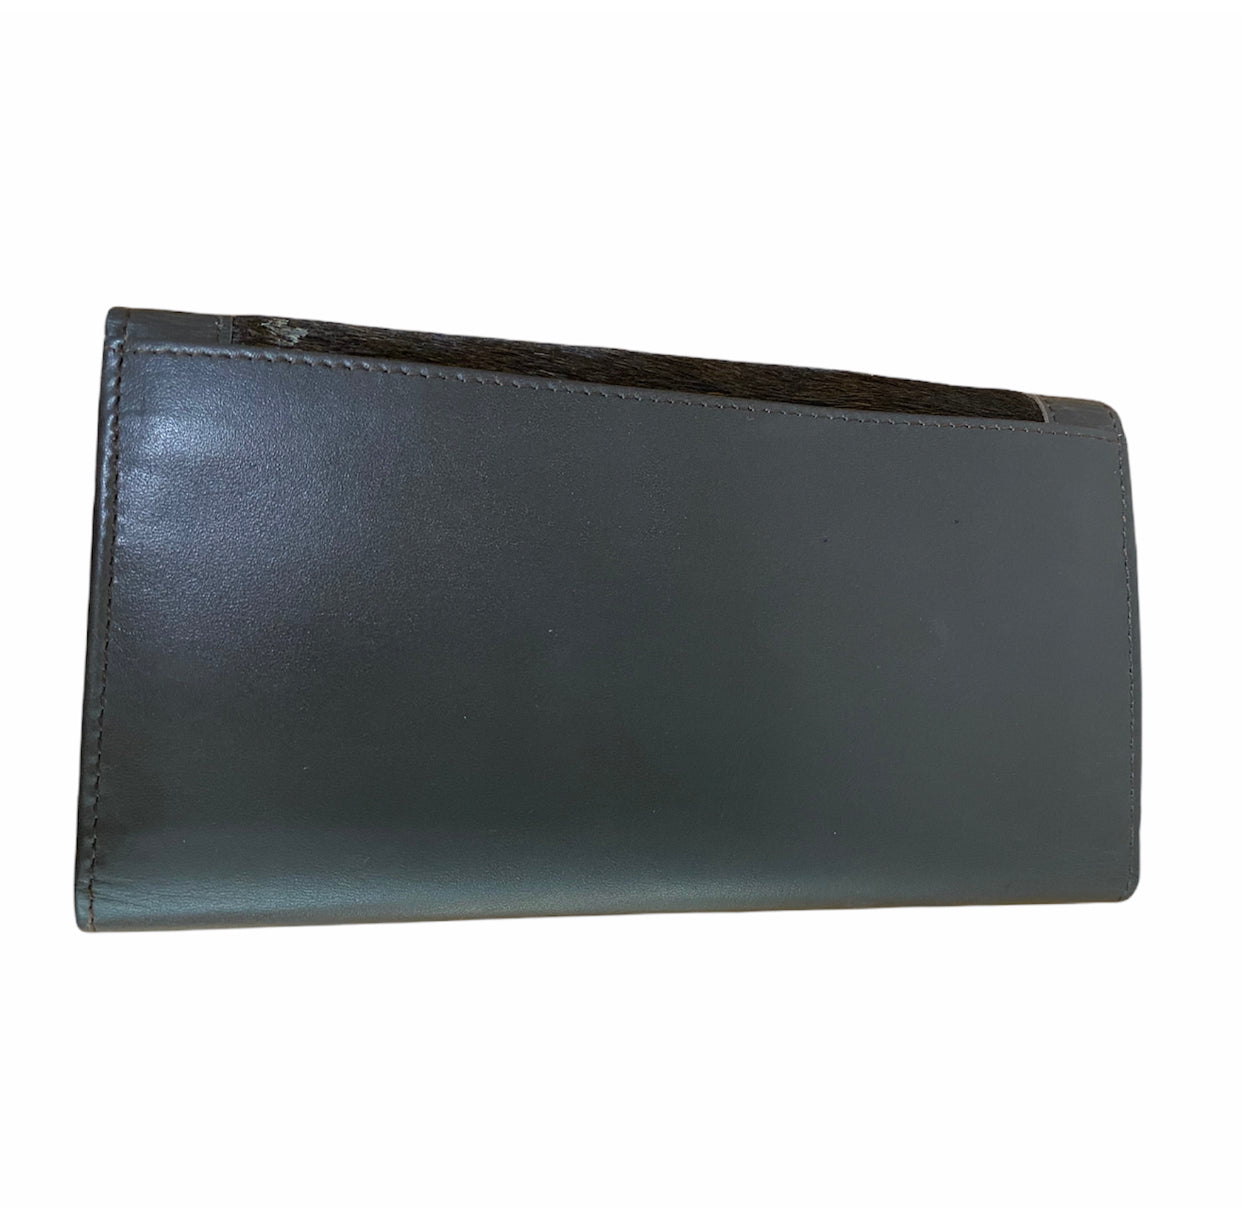 A7763 - Hair-On Collection Secretary Style Wallet